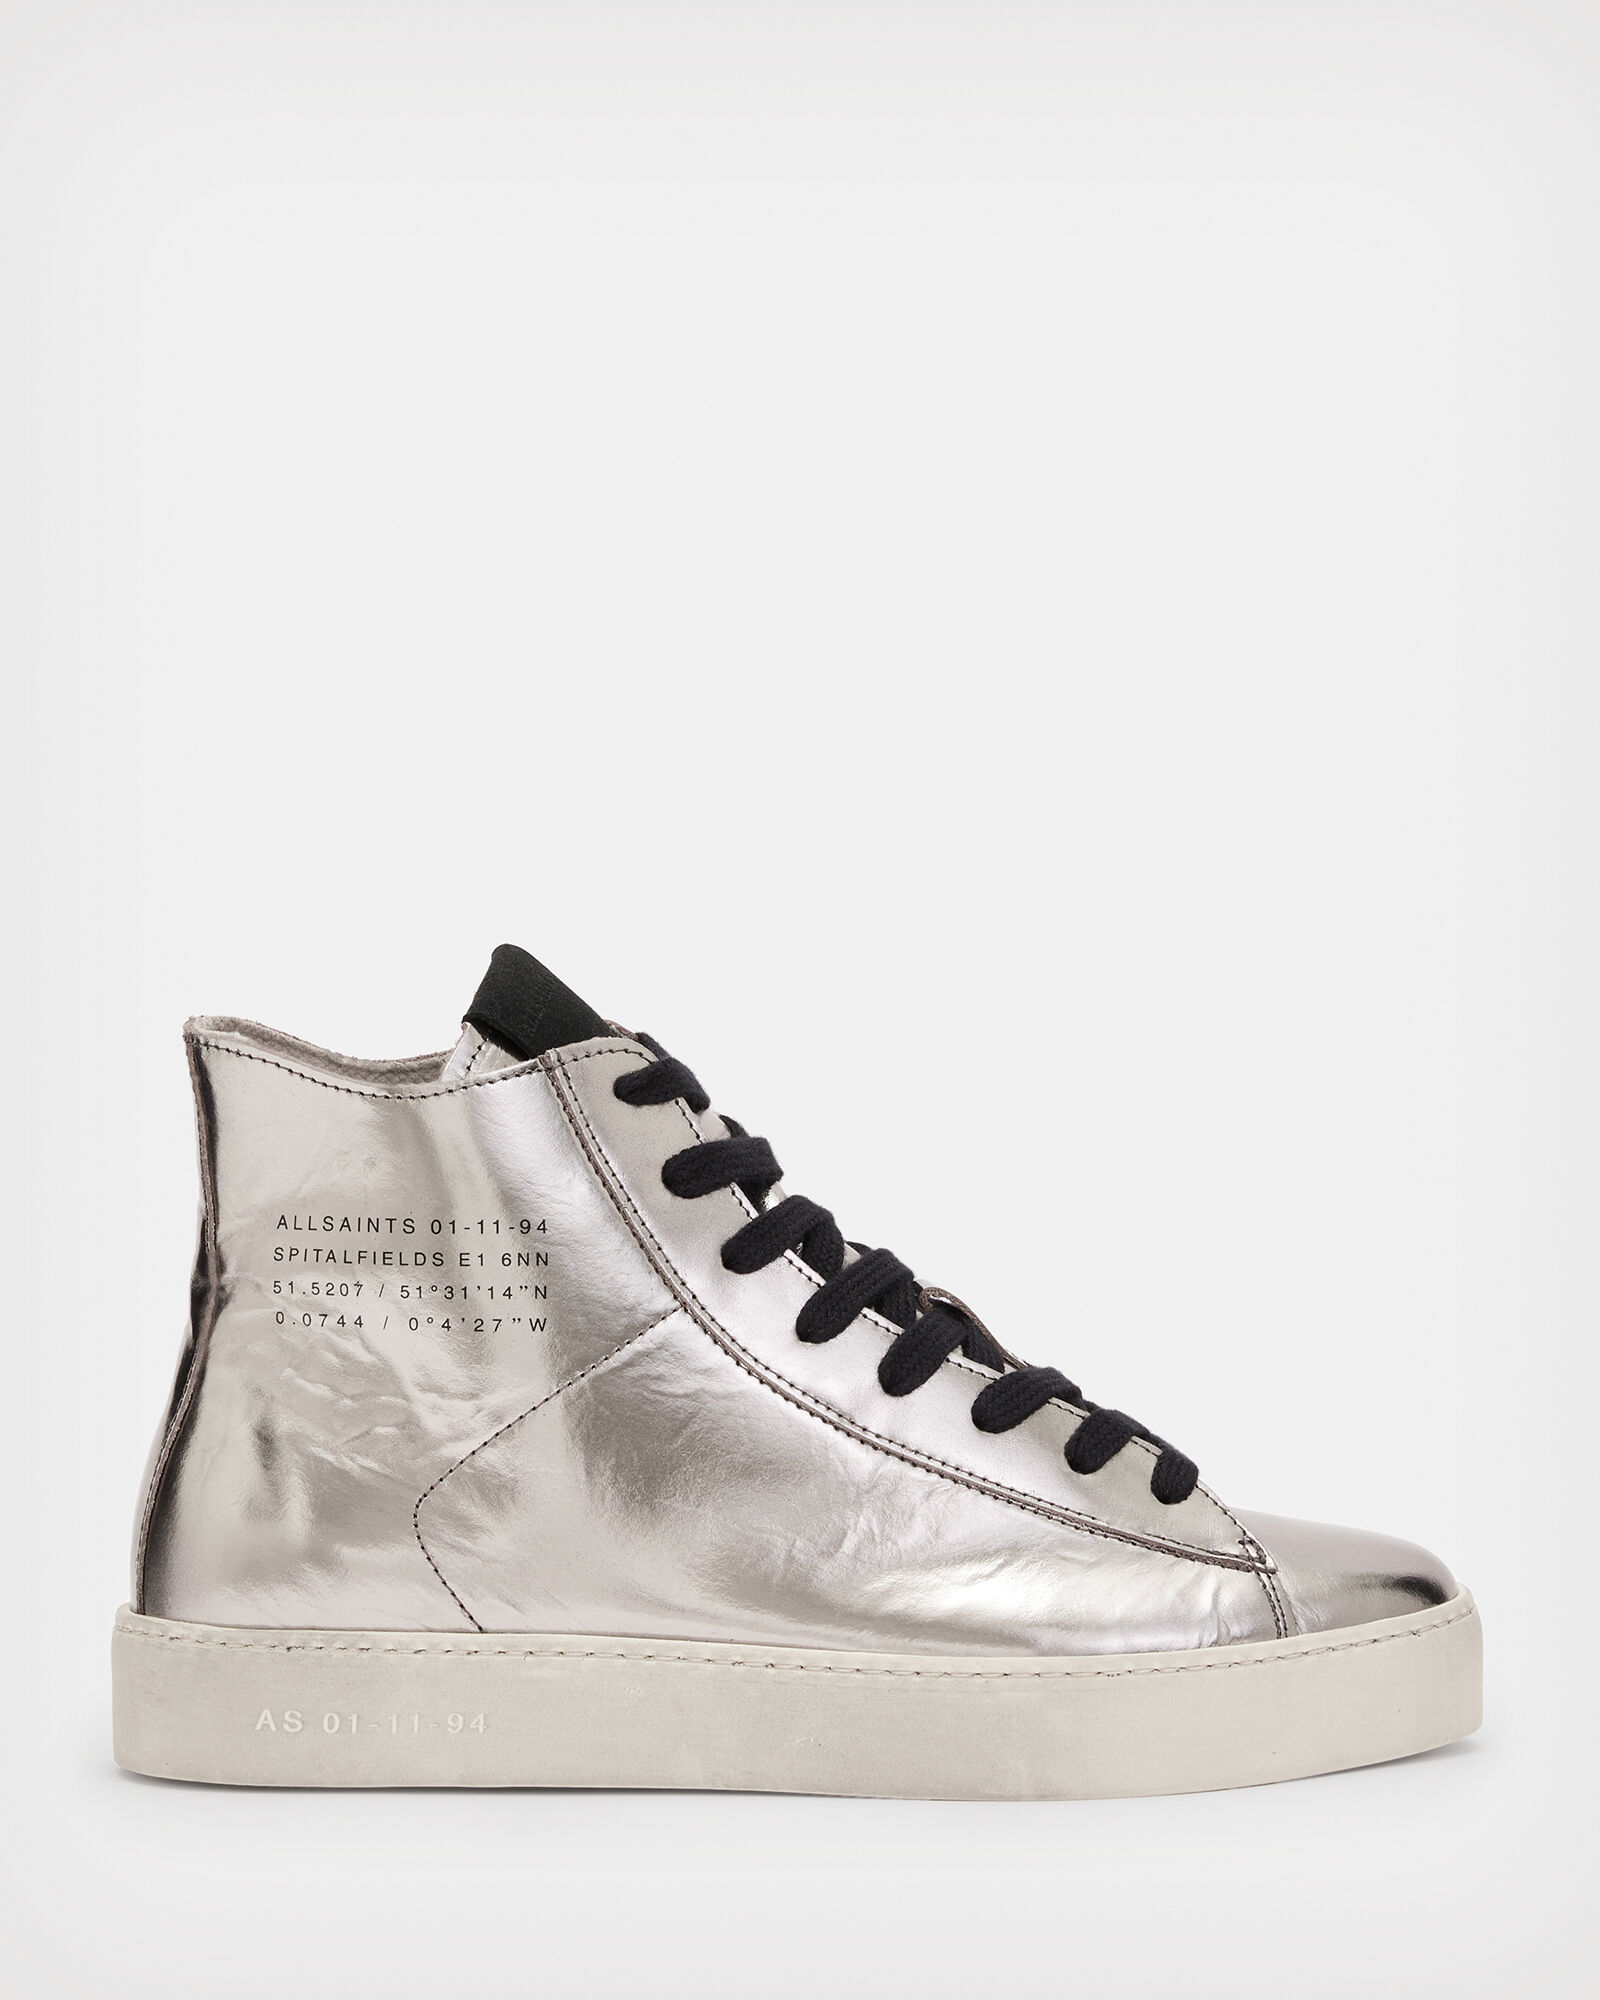 Tana Metallic Leather High Top Sneakers Silver | ALLSAINTS US